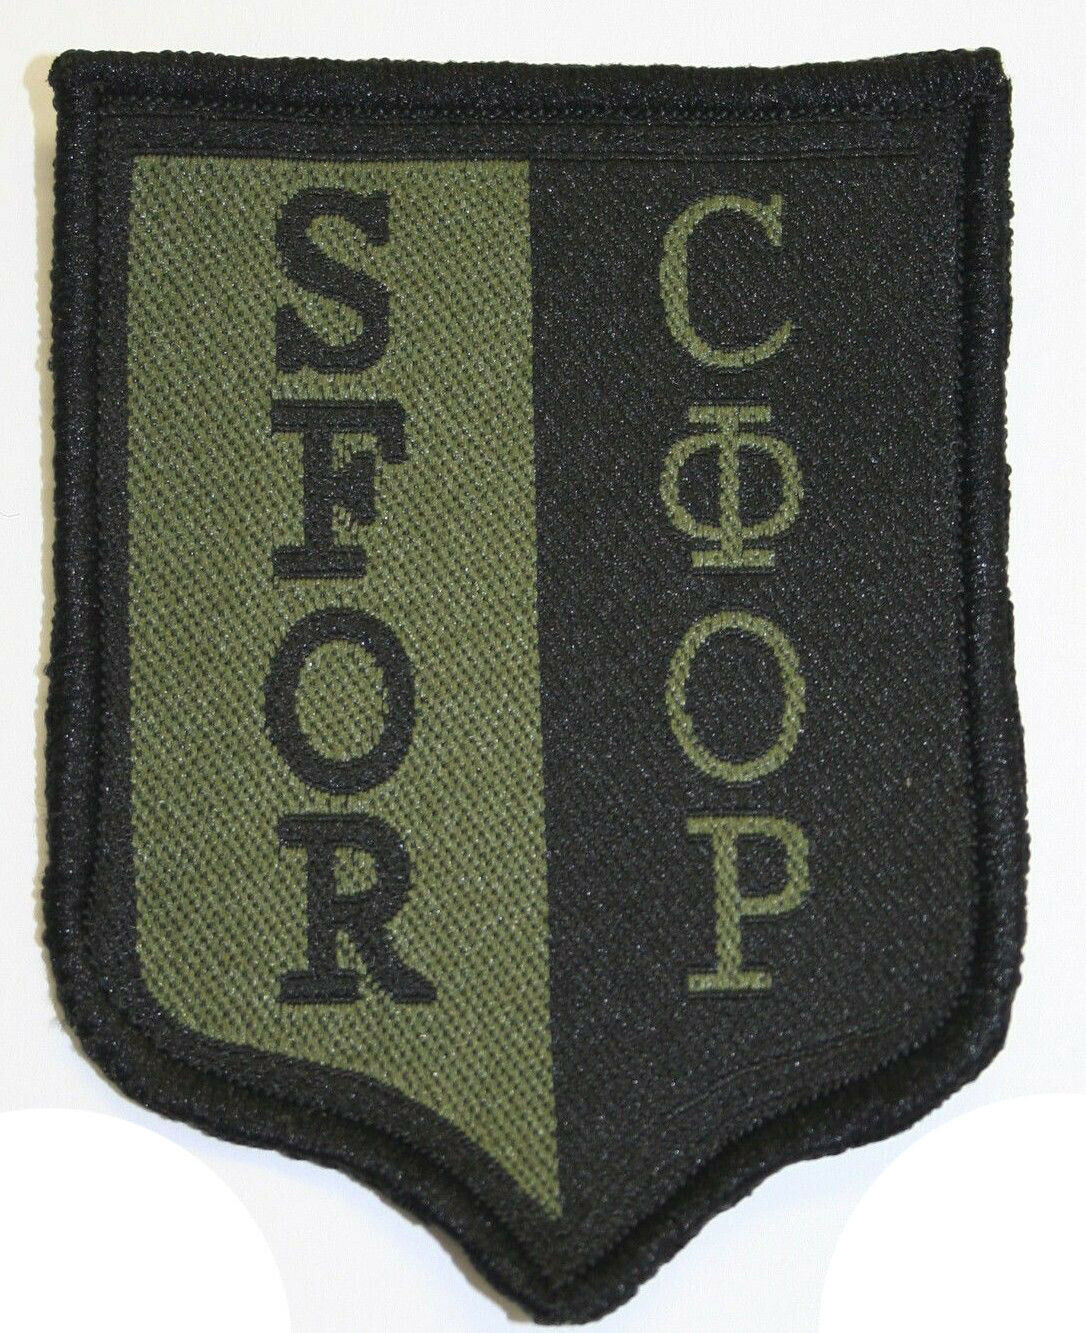 Military Bosnia Patch SFOR NATO Stabilization Force Green Black Subdued Genuine